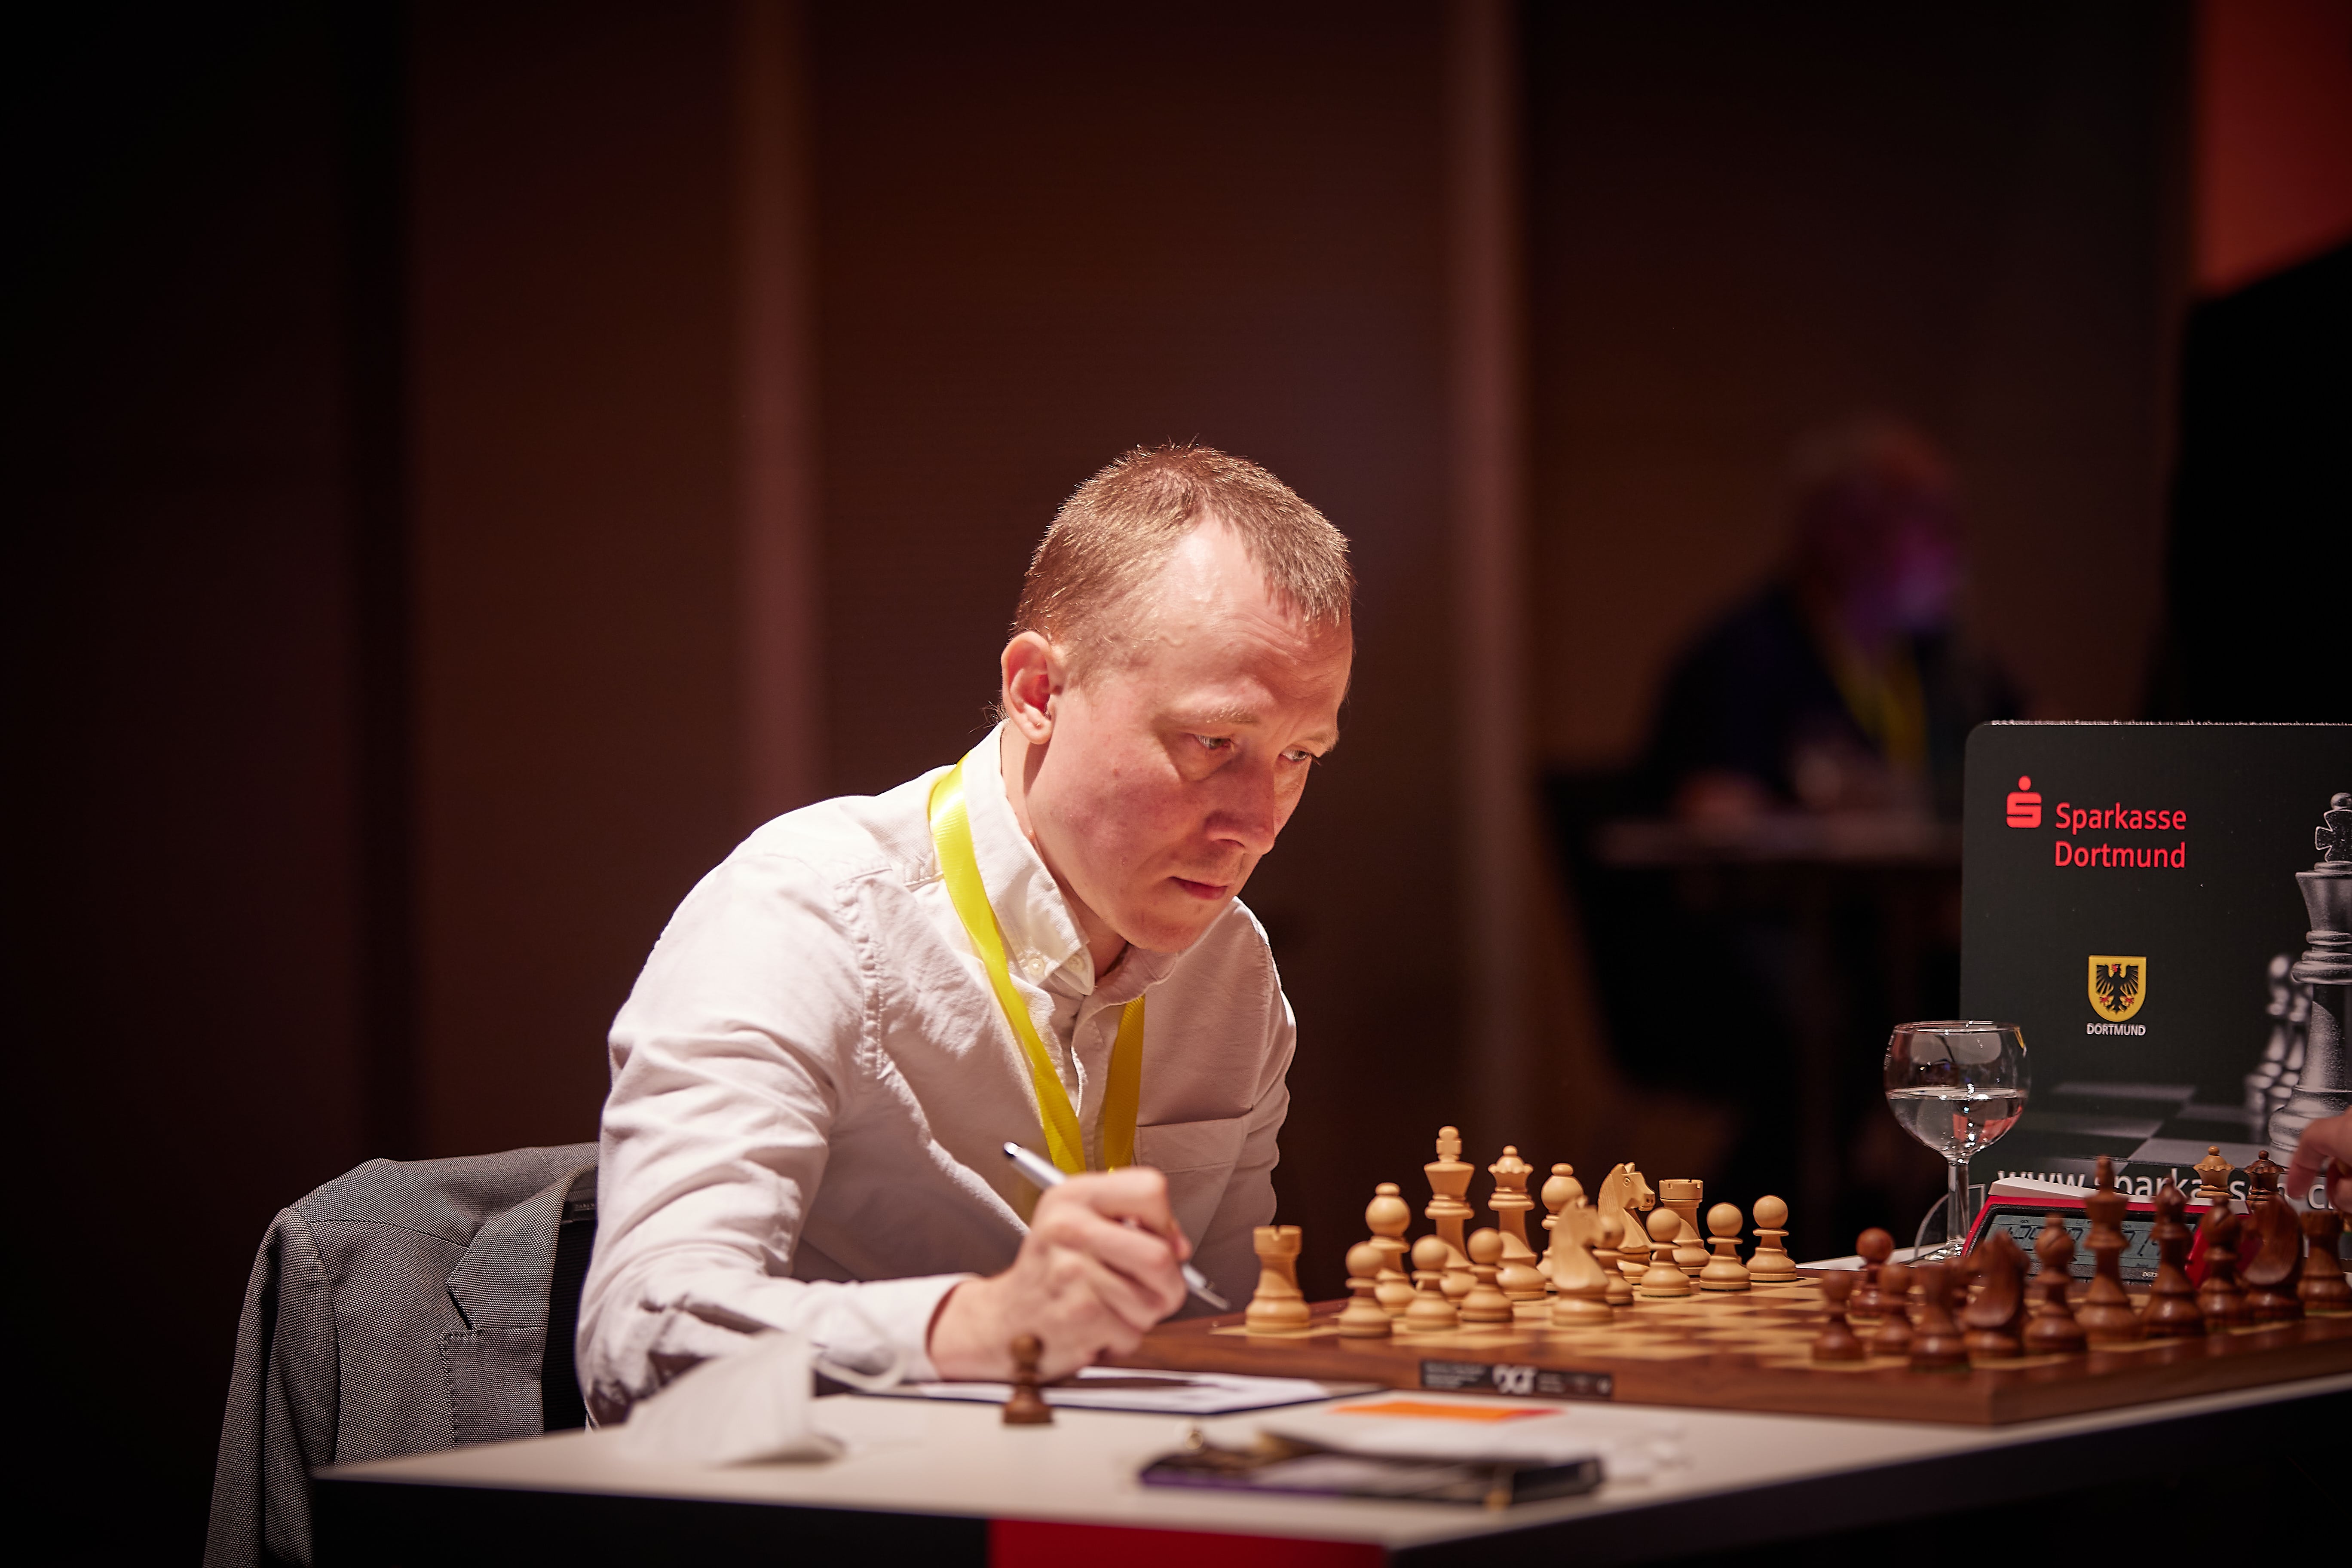 Exceptional Open within the 50th International Dortmund Chess Days